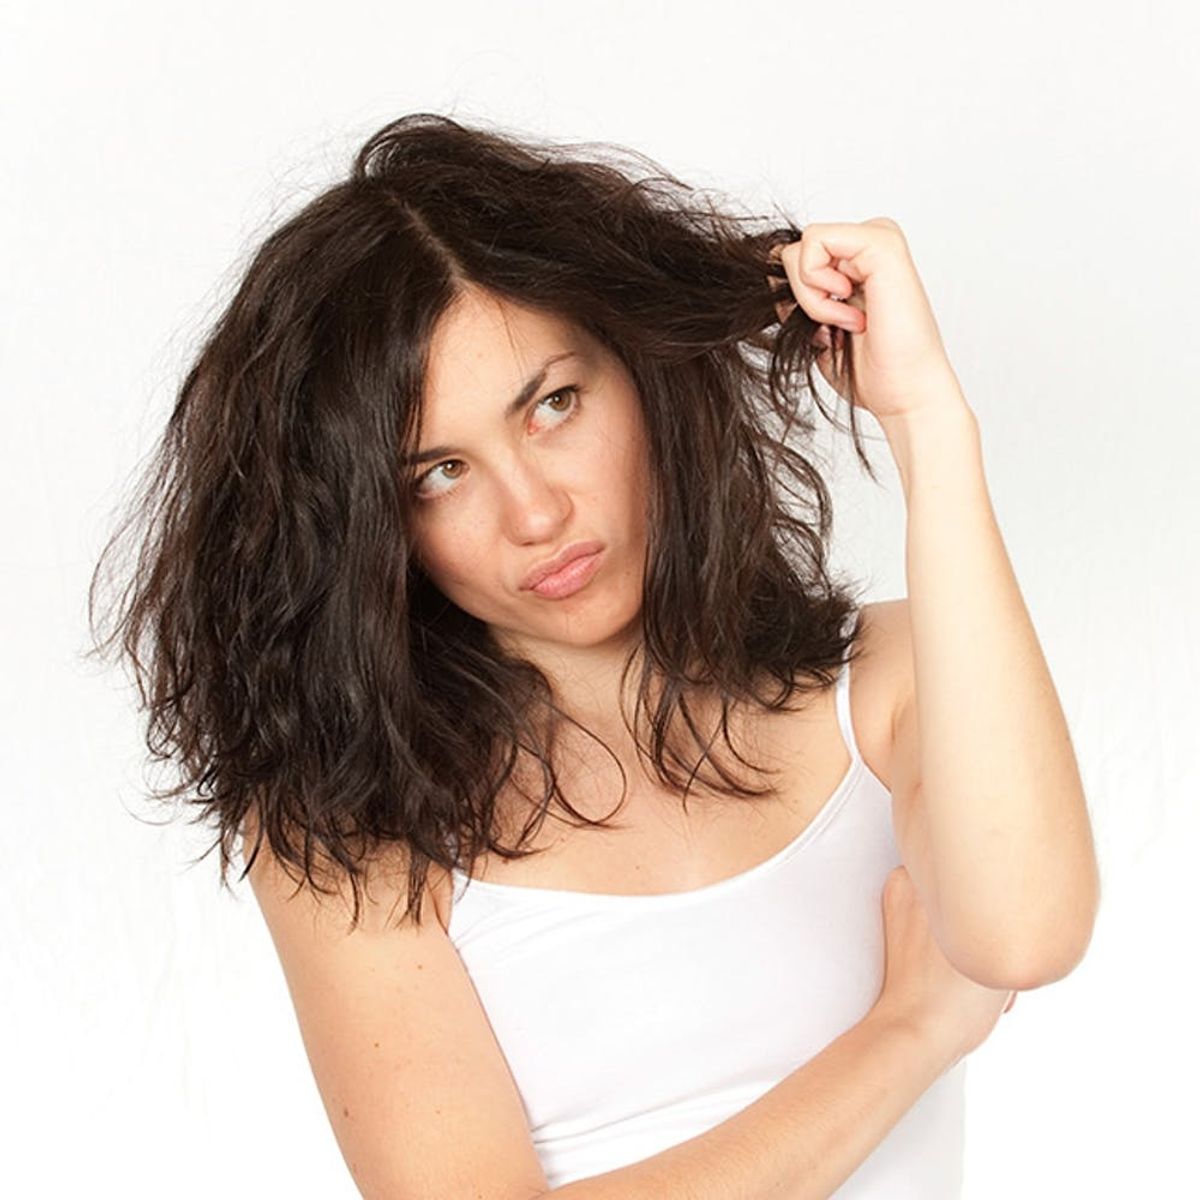 7 Expert-Approved Tips to Fight Frizz This Summer